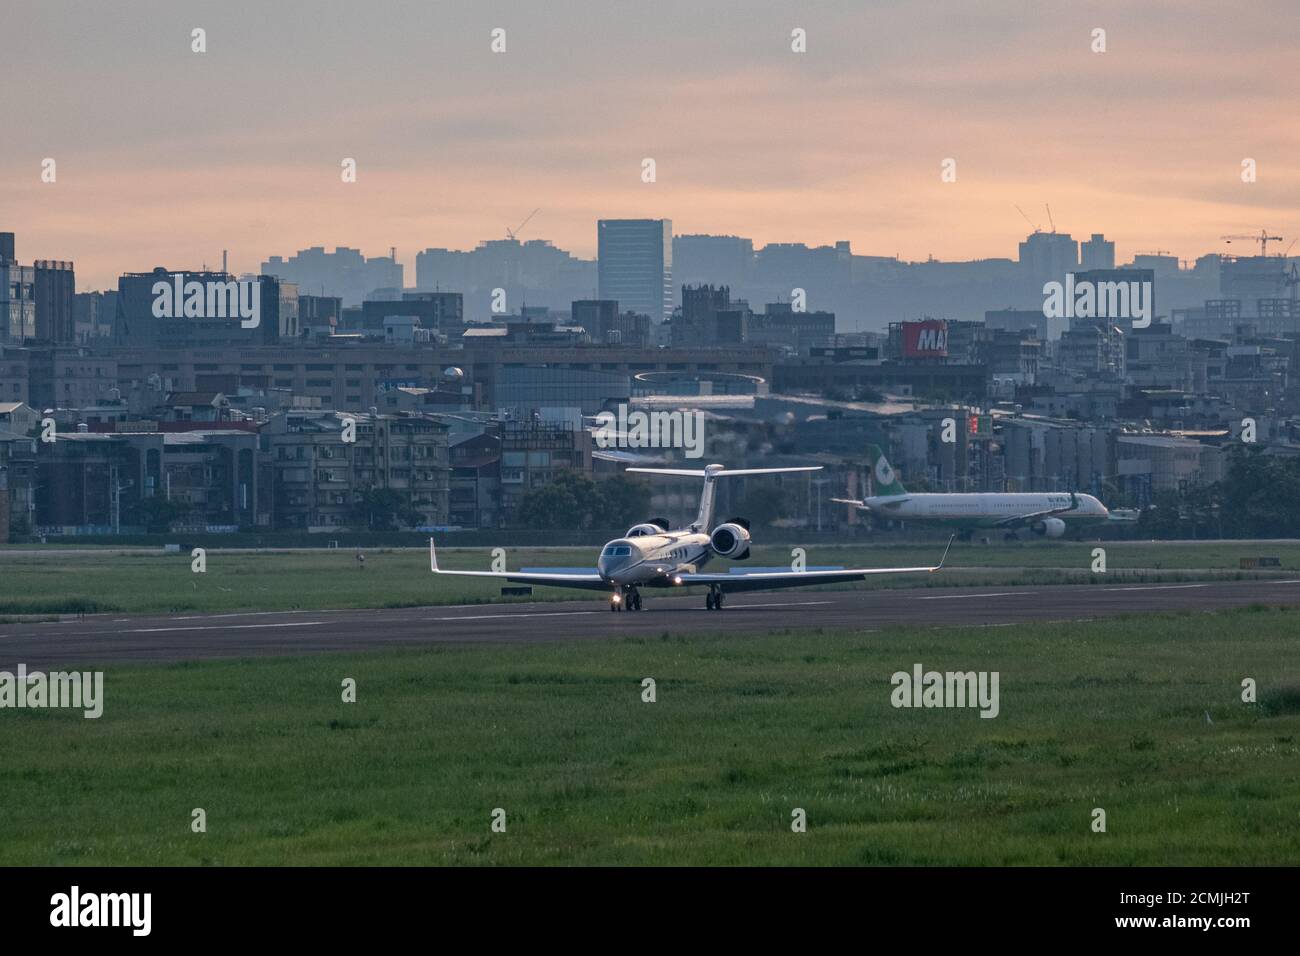 Taipei, Taiwan. 17th Sep, 2020. US. Gulfstream G-V plane carrying the US. Under Secretary for Economic Growth, Energy, and the Environment, Keith J. Krach on board lands at Songshan Airport in Taipei.Keith Krach, a senior member of US President Donald Trump's administration, landed in Taiwan on September 17, 2020, for Washington's highest-level visit since switching diplomatic recognition to China in 1979. Credit: SOPA Images Limited/Alamy Live News Stock Photo